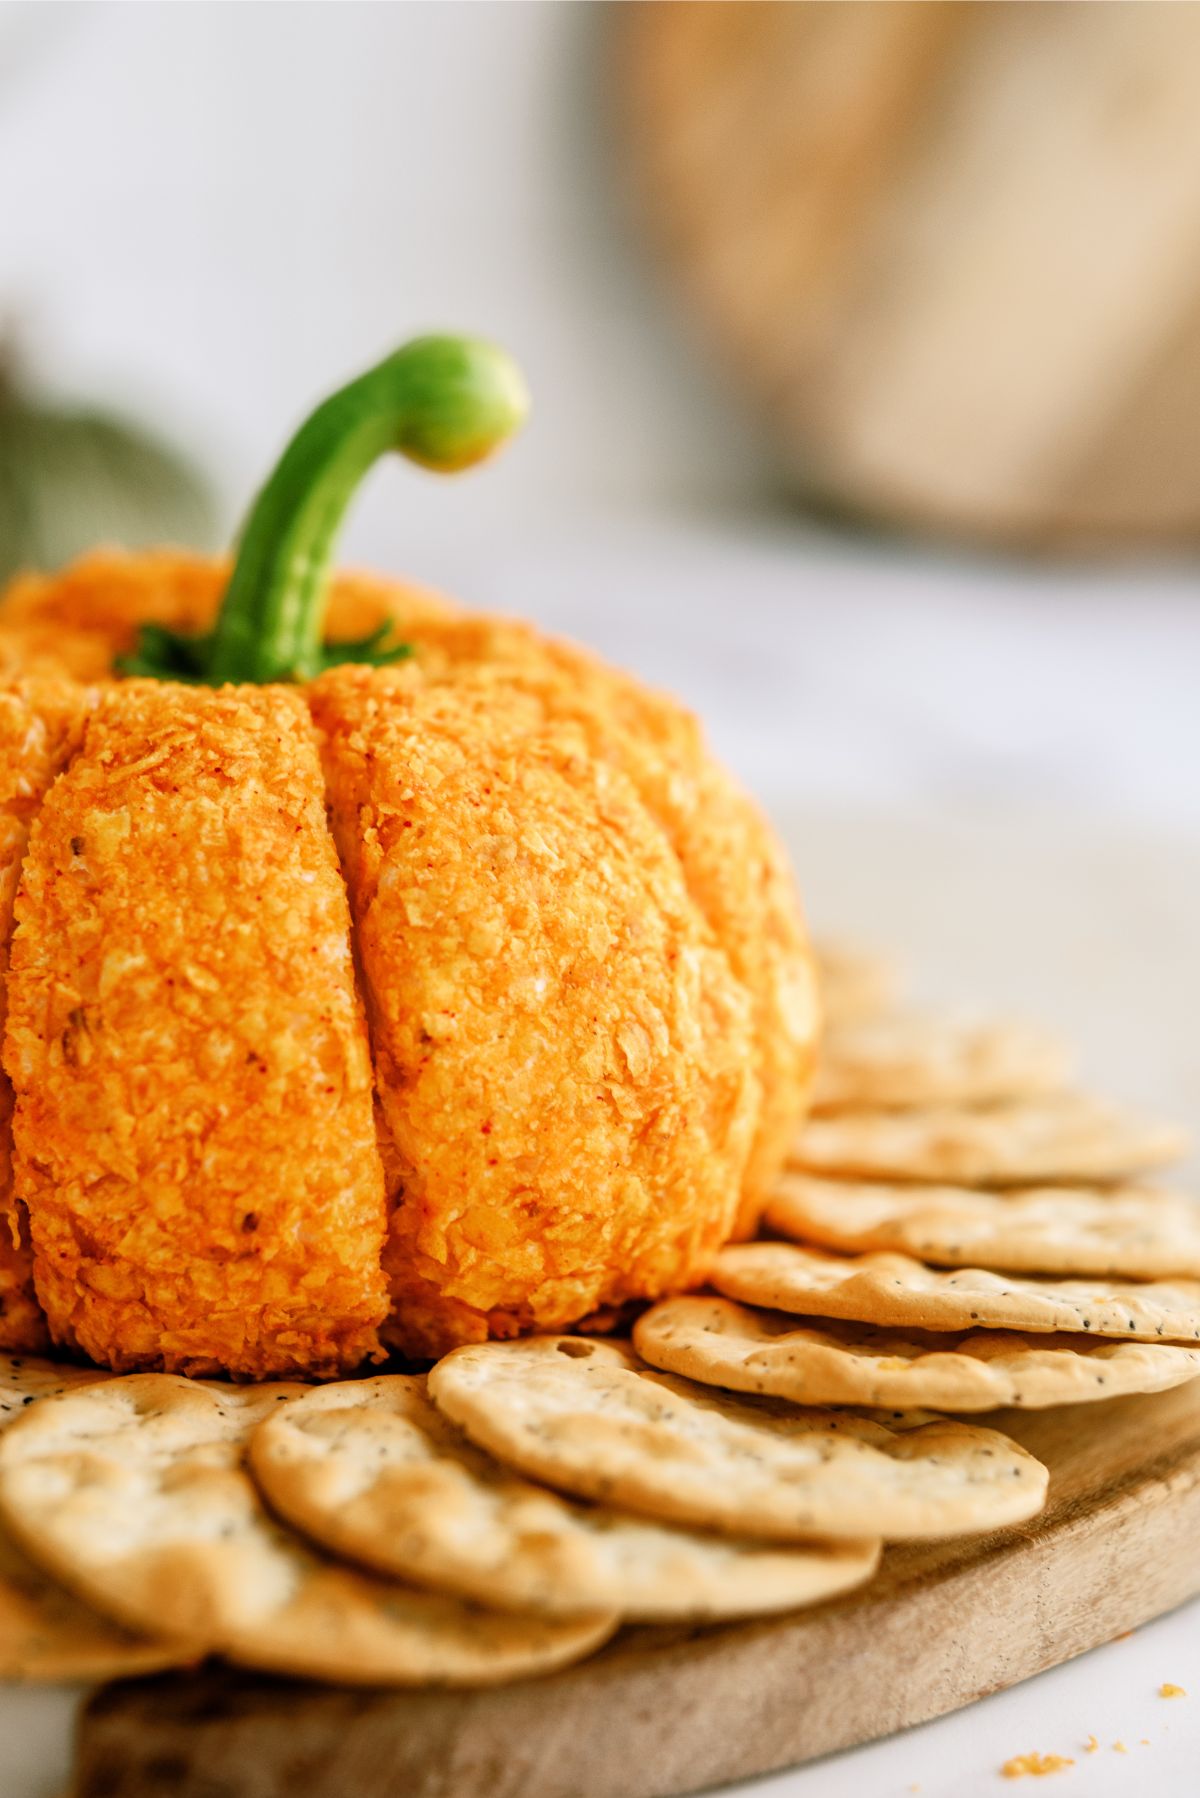 Pumpkin-Shaped Cheeseball with crackers on a cutting board